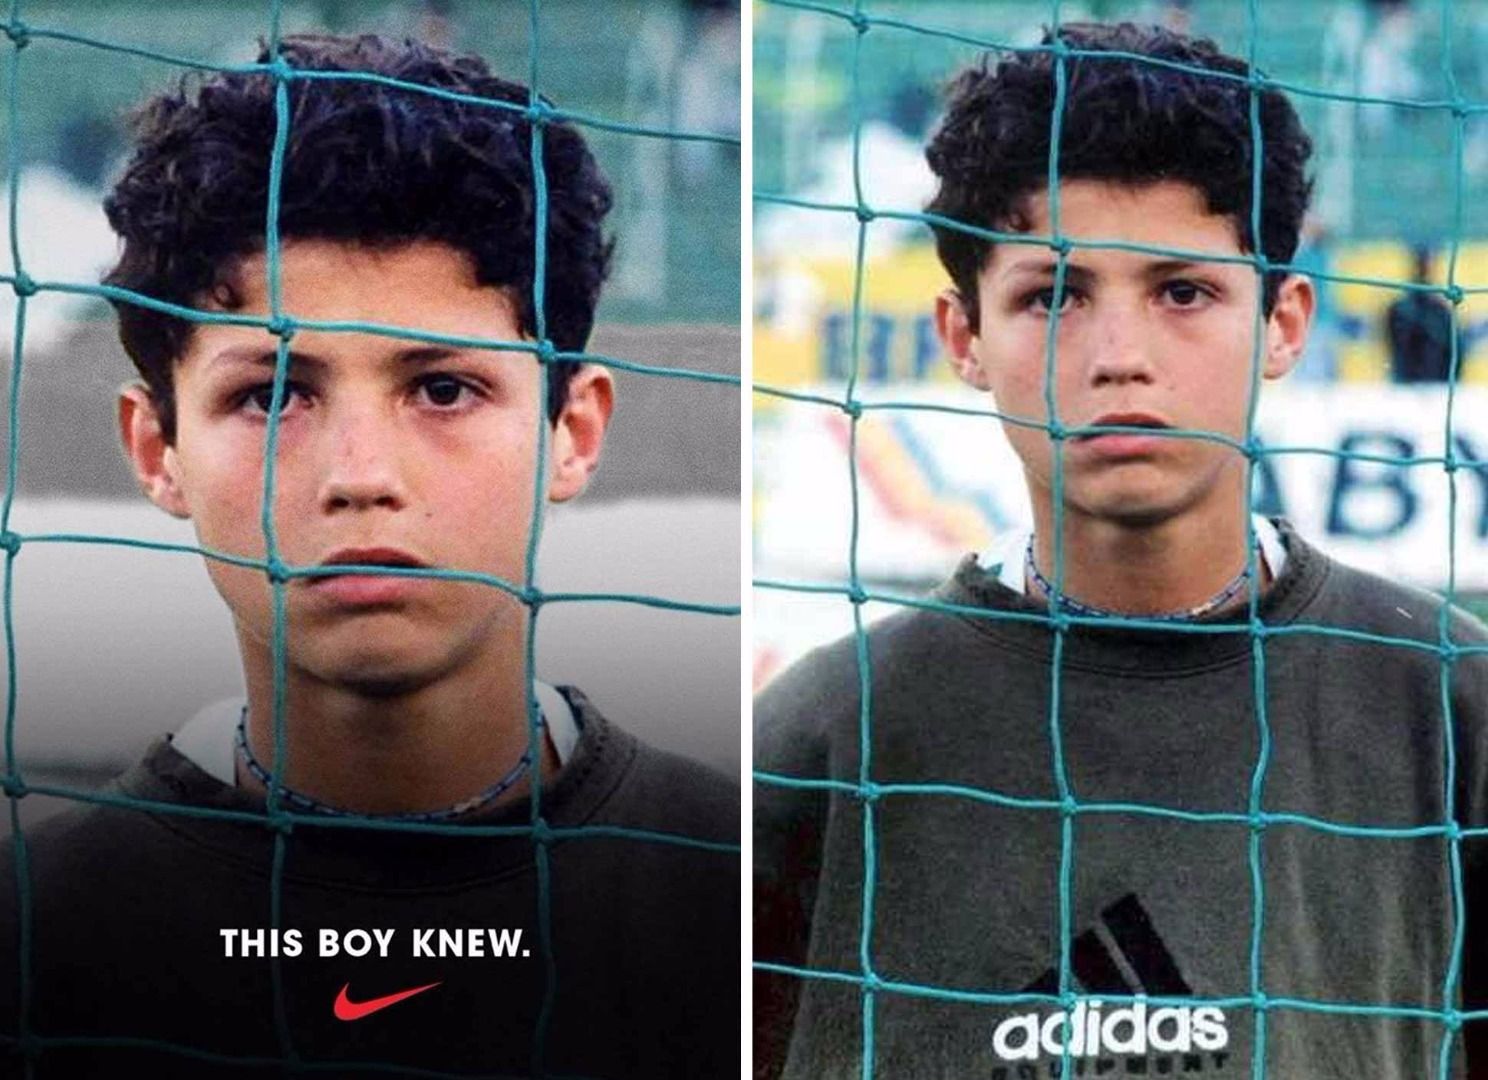 Mm serie Doctor in de filosofie Cristiano Ronaldo was wearing an adidas shirt in the last Nike ad